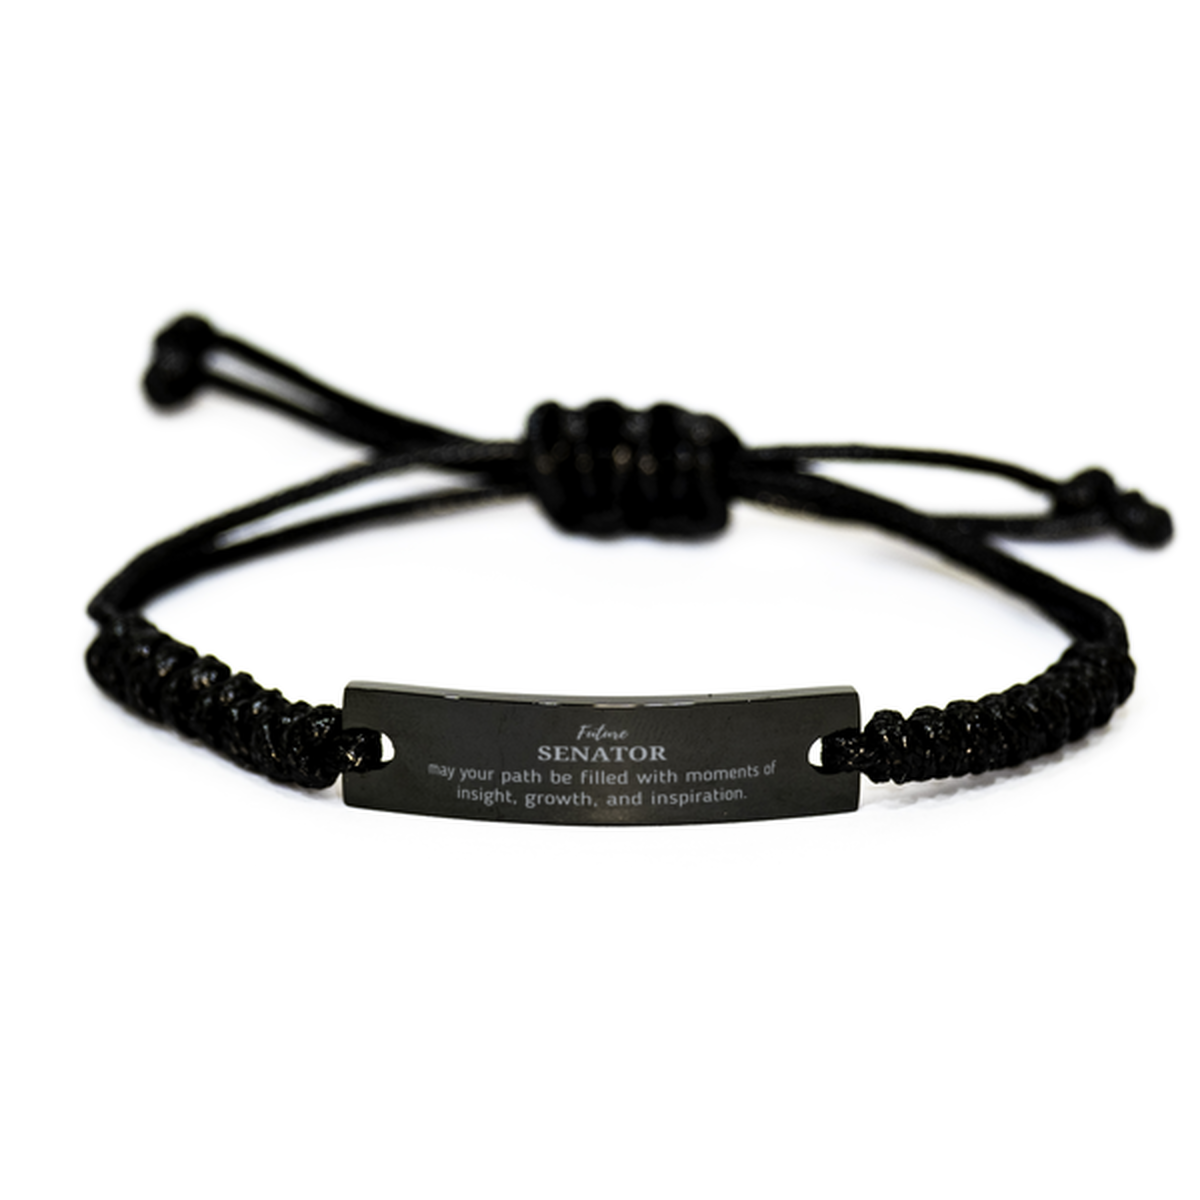 Future Senator Gifts, May your path be filled with moments of insight, Graduation Gifts for New Senator, Christmas Unique Black Rope Bracelet For Men, Women, Friends